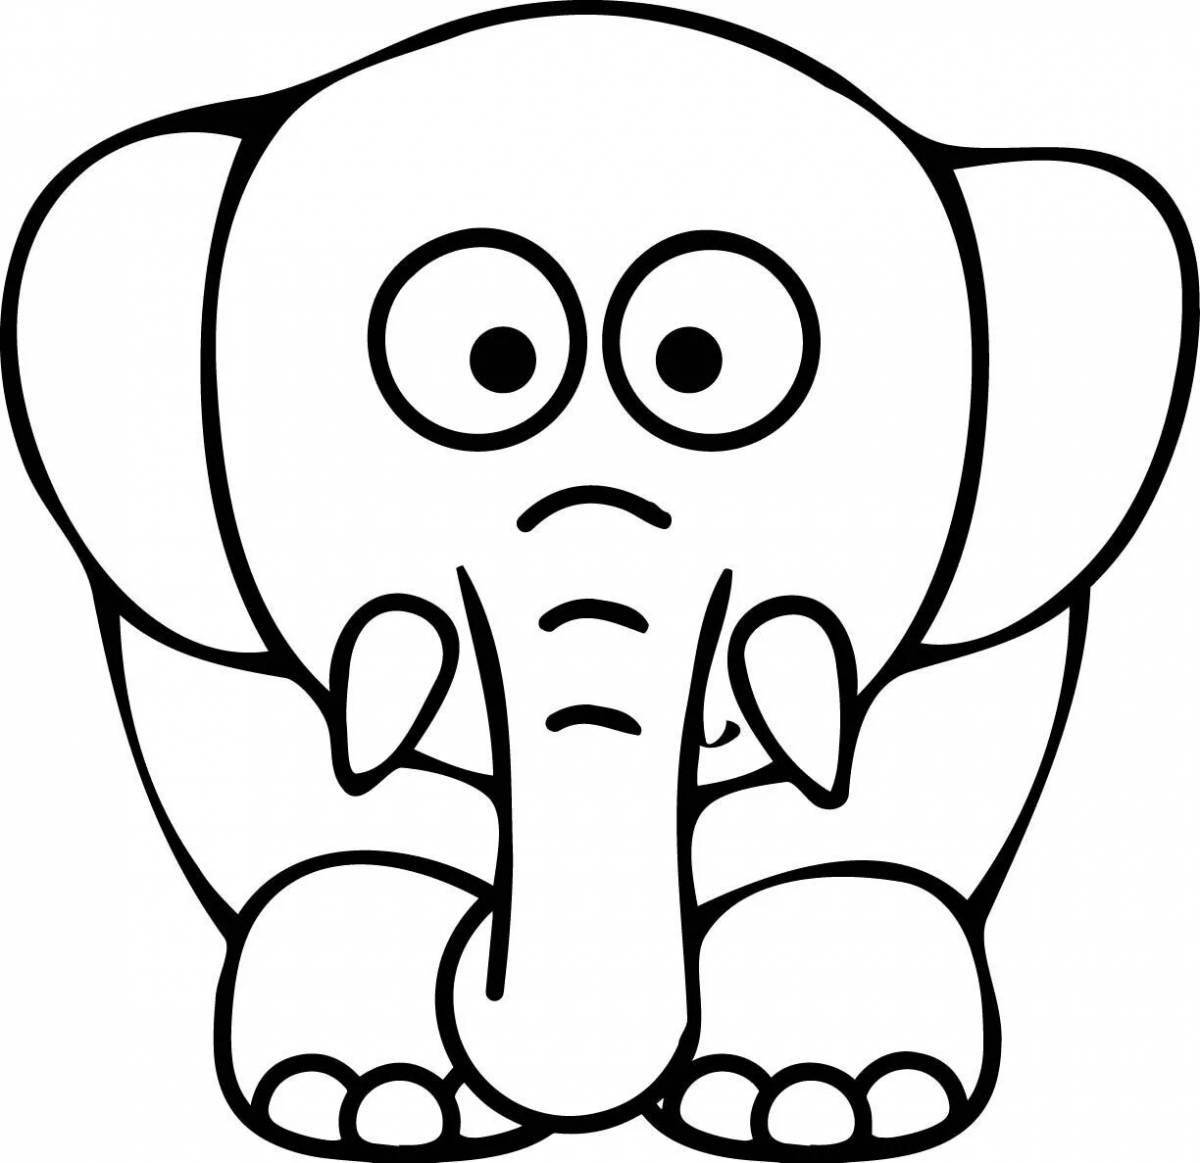 Adorable elephant coloring book for 7 year olds